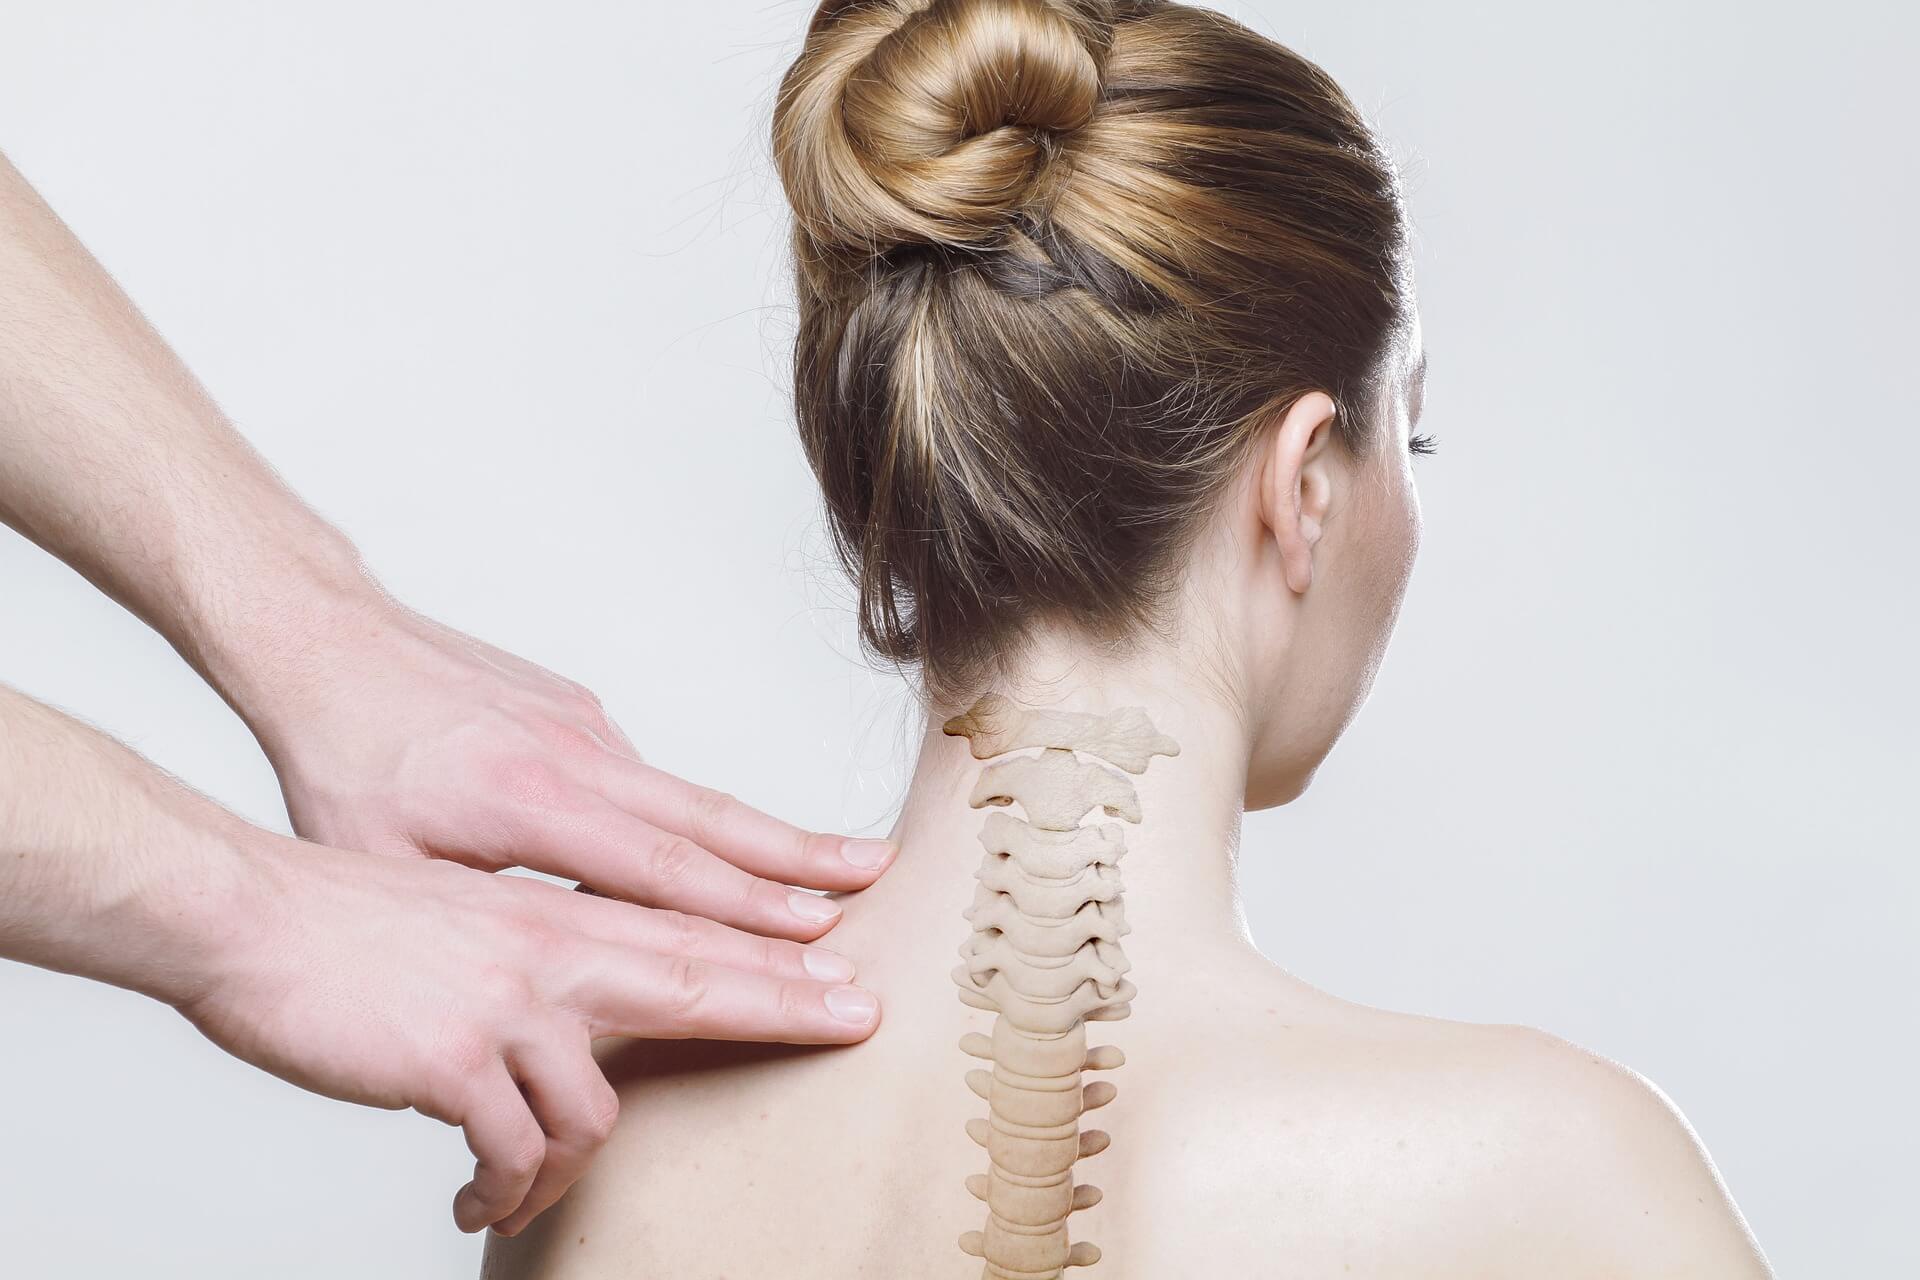 4 Types of Spinal Injuries and How They Affect Your Brain